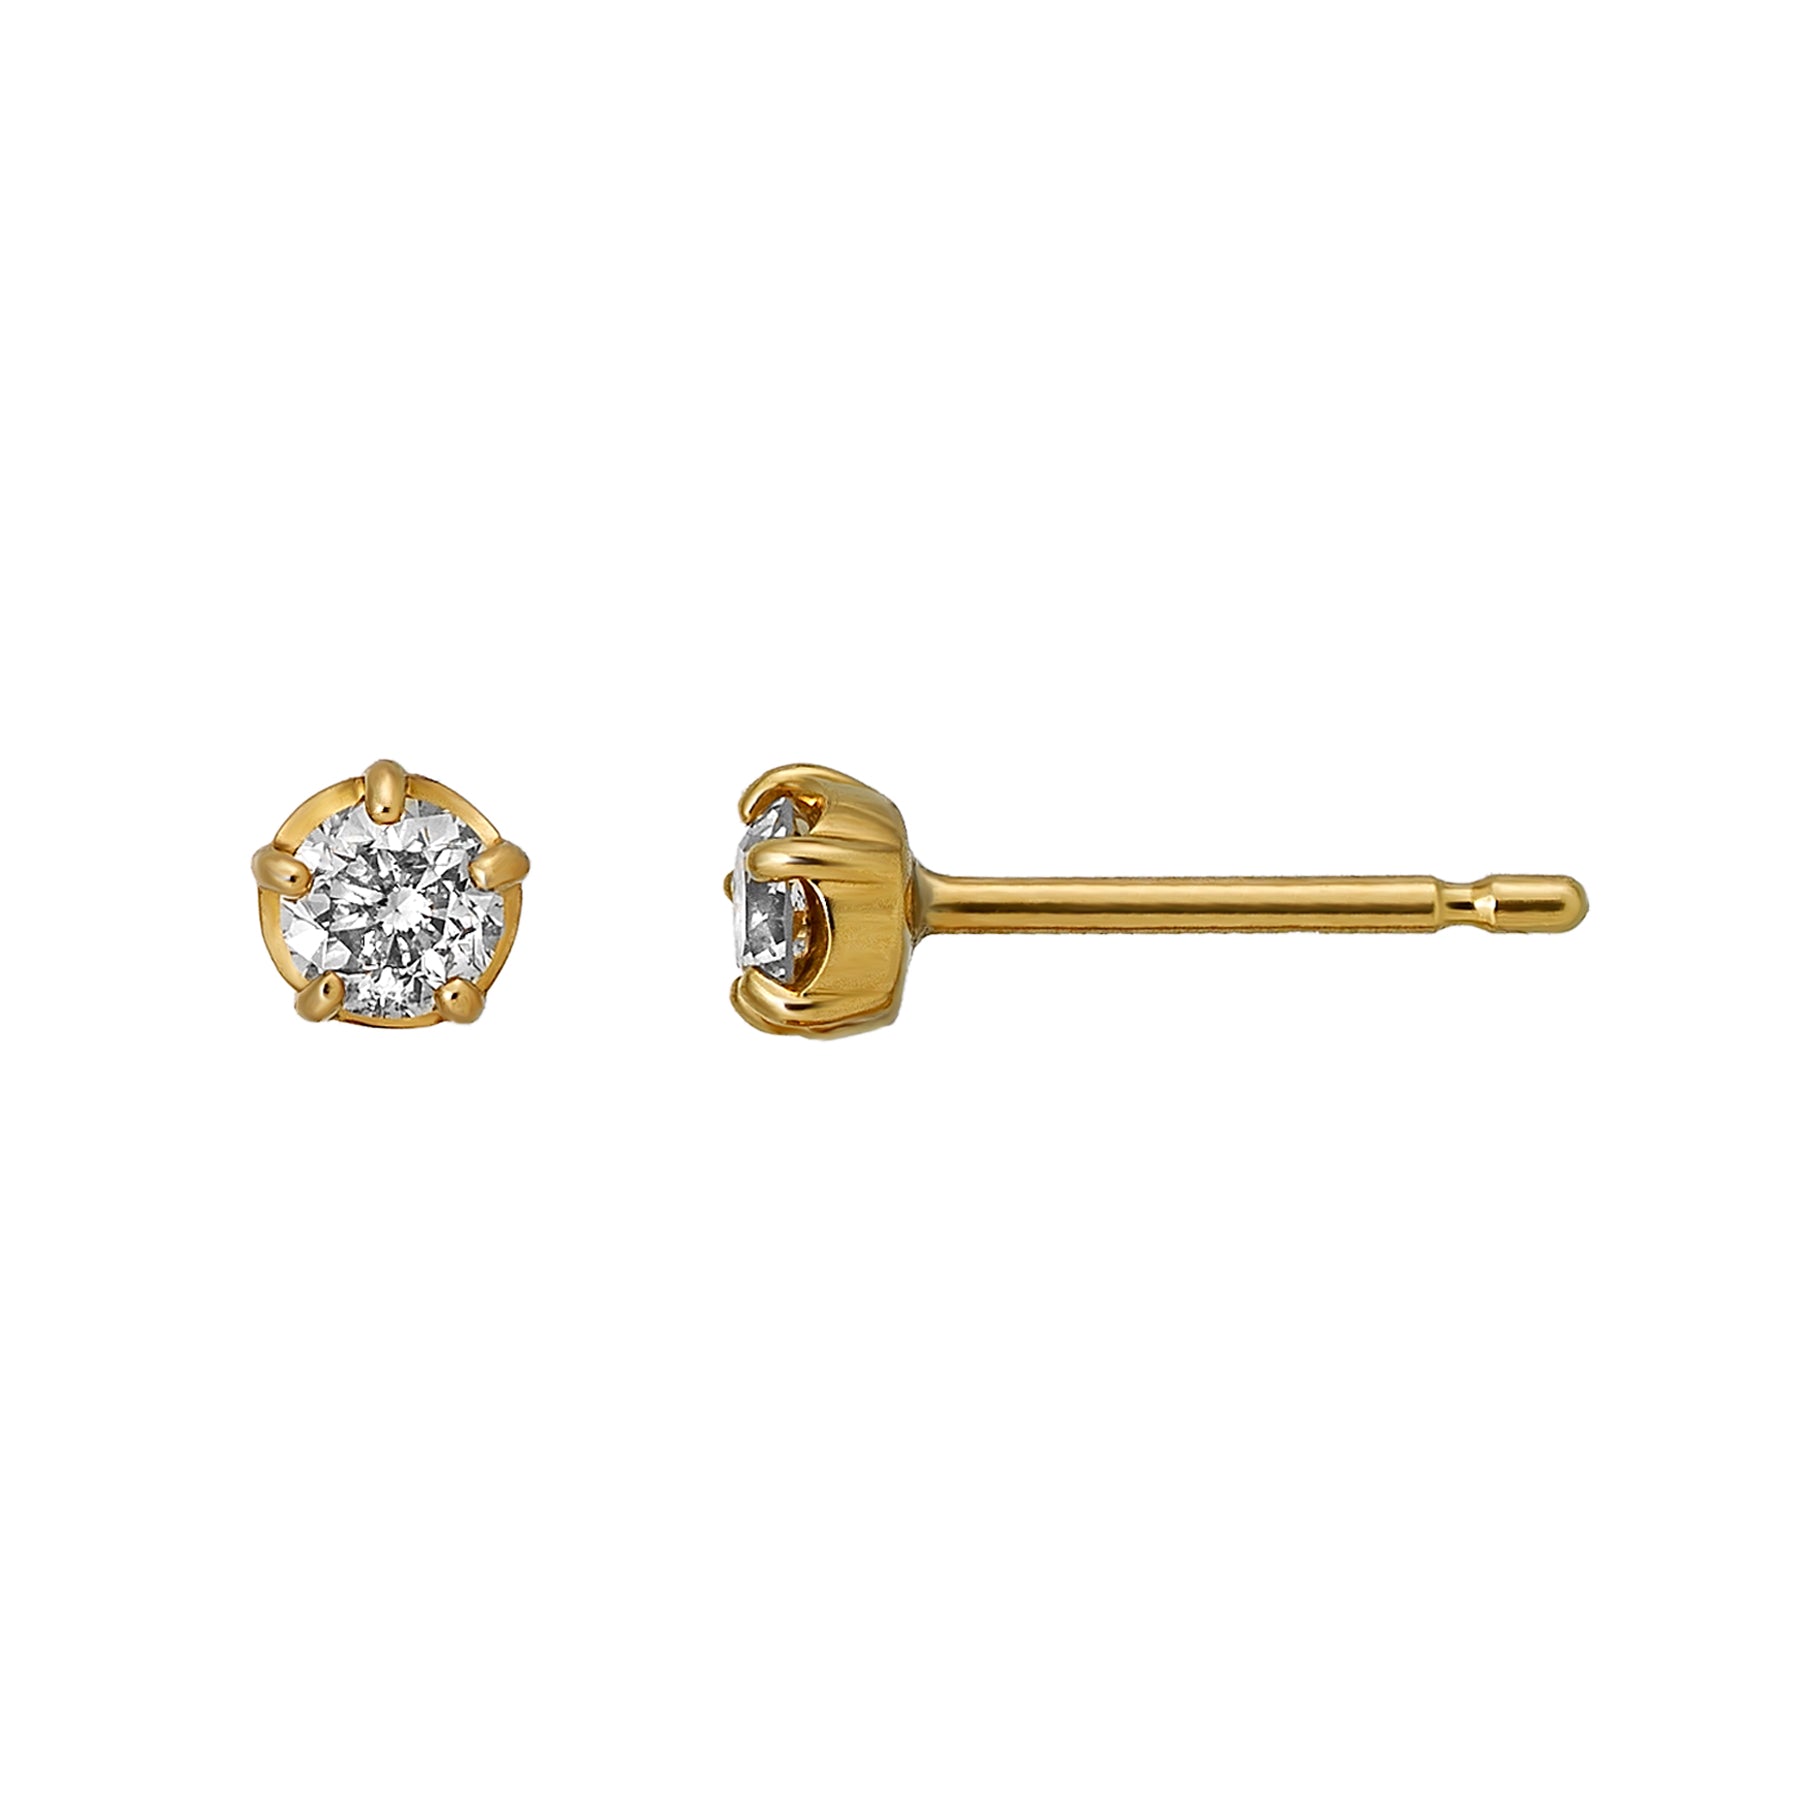 [Second Earrings] 18K Yellow Gold Diamond Earrings 0. 26ct - Product Image